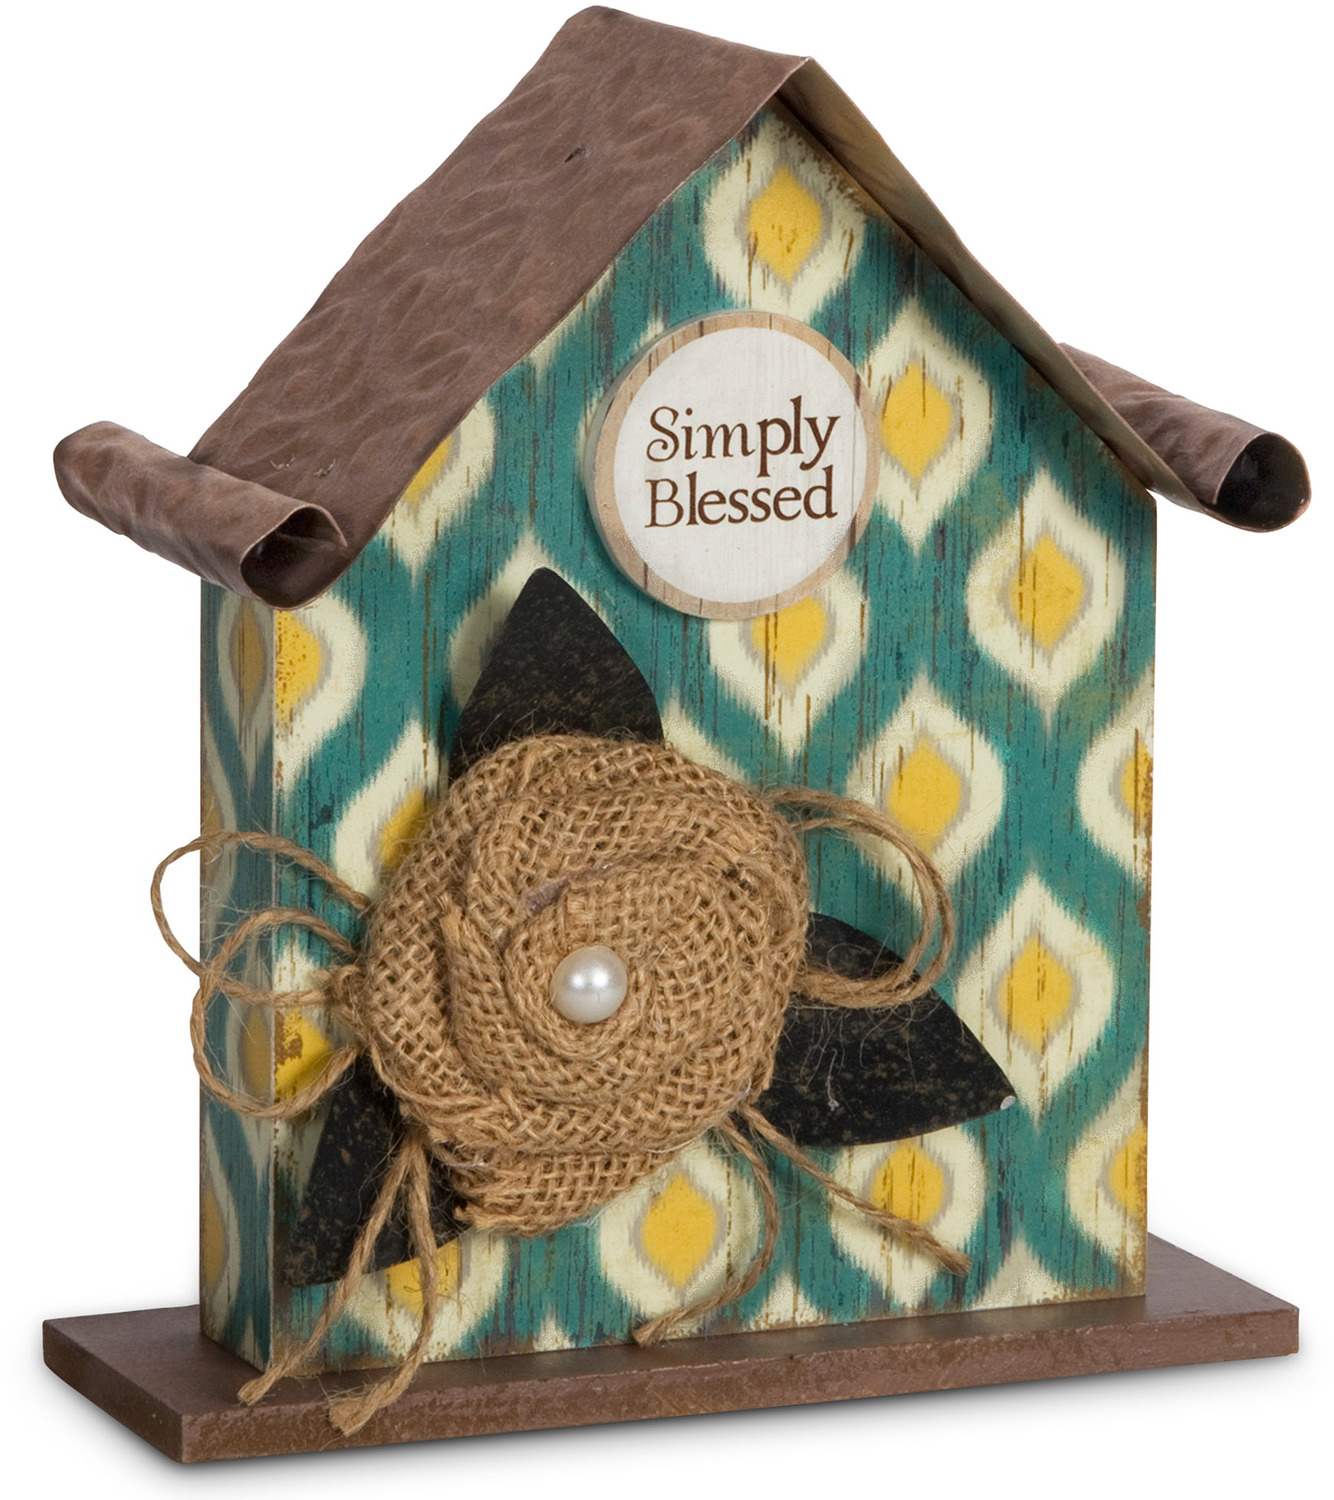 Simply Blessed by Simple Spirits - Simply Blessed - 6.5" Birdhouse Plaque